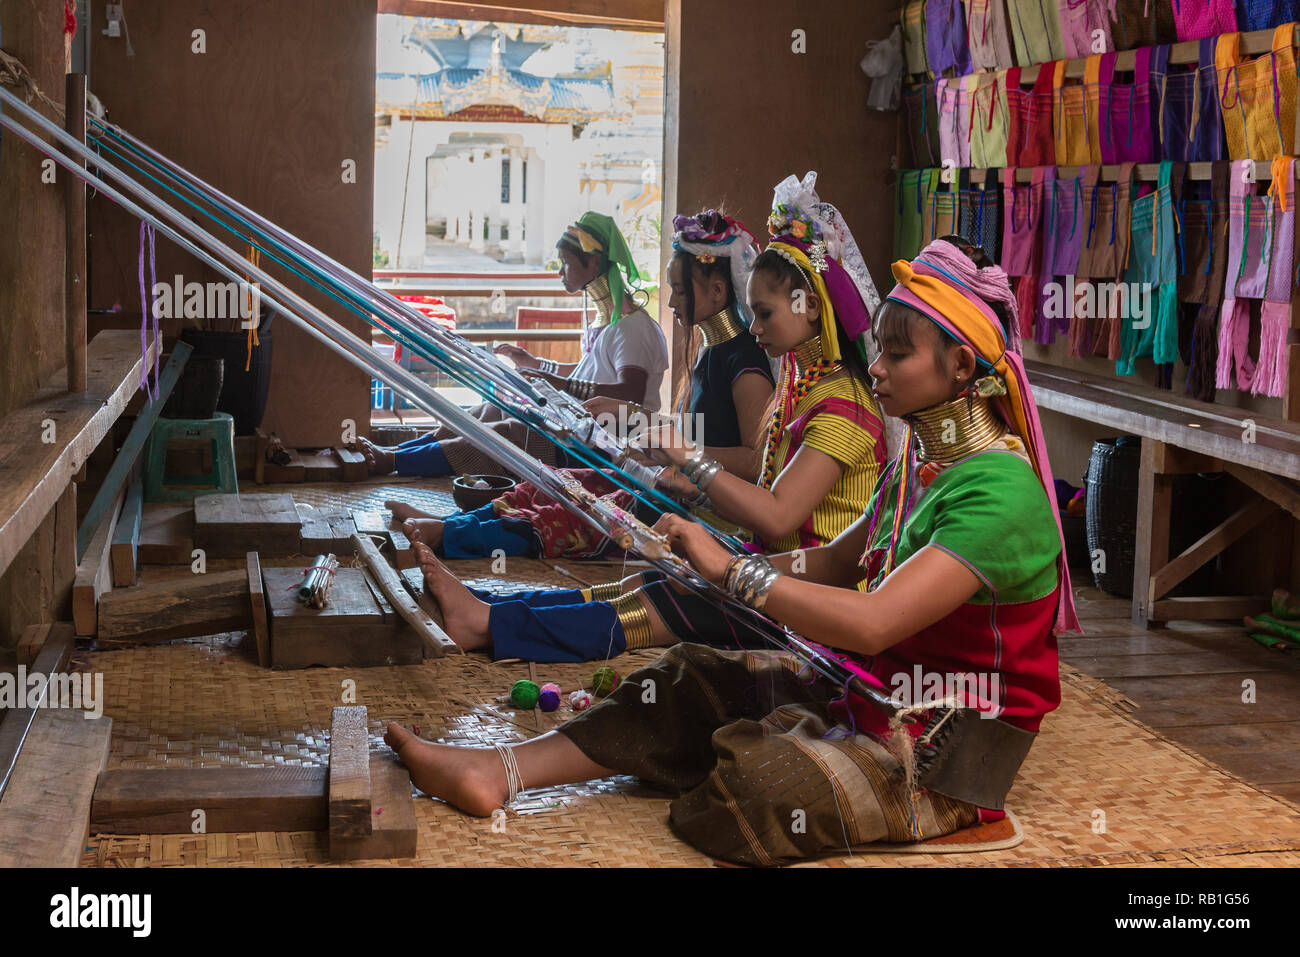 Four Kayan (Padaung) women wearing brass neck coils and colourful traditional dress, weaving cloth using traditional looms with a pagoda in the backgr Stock Photo